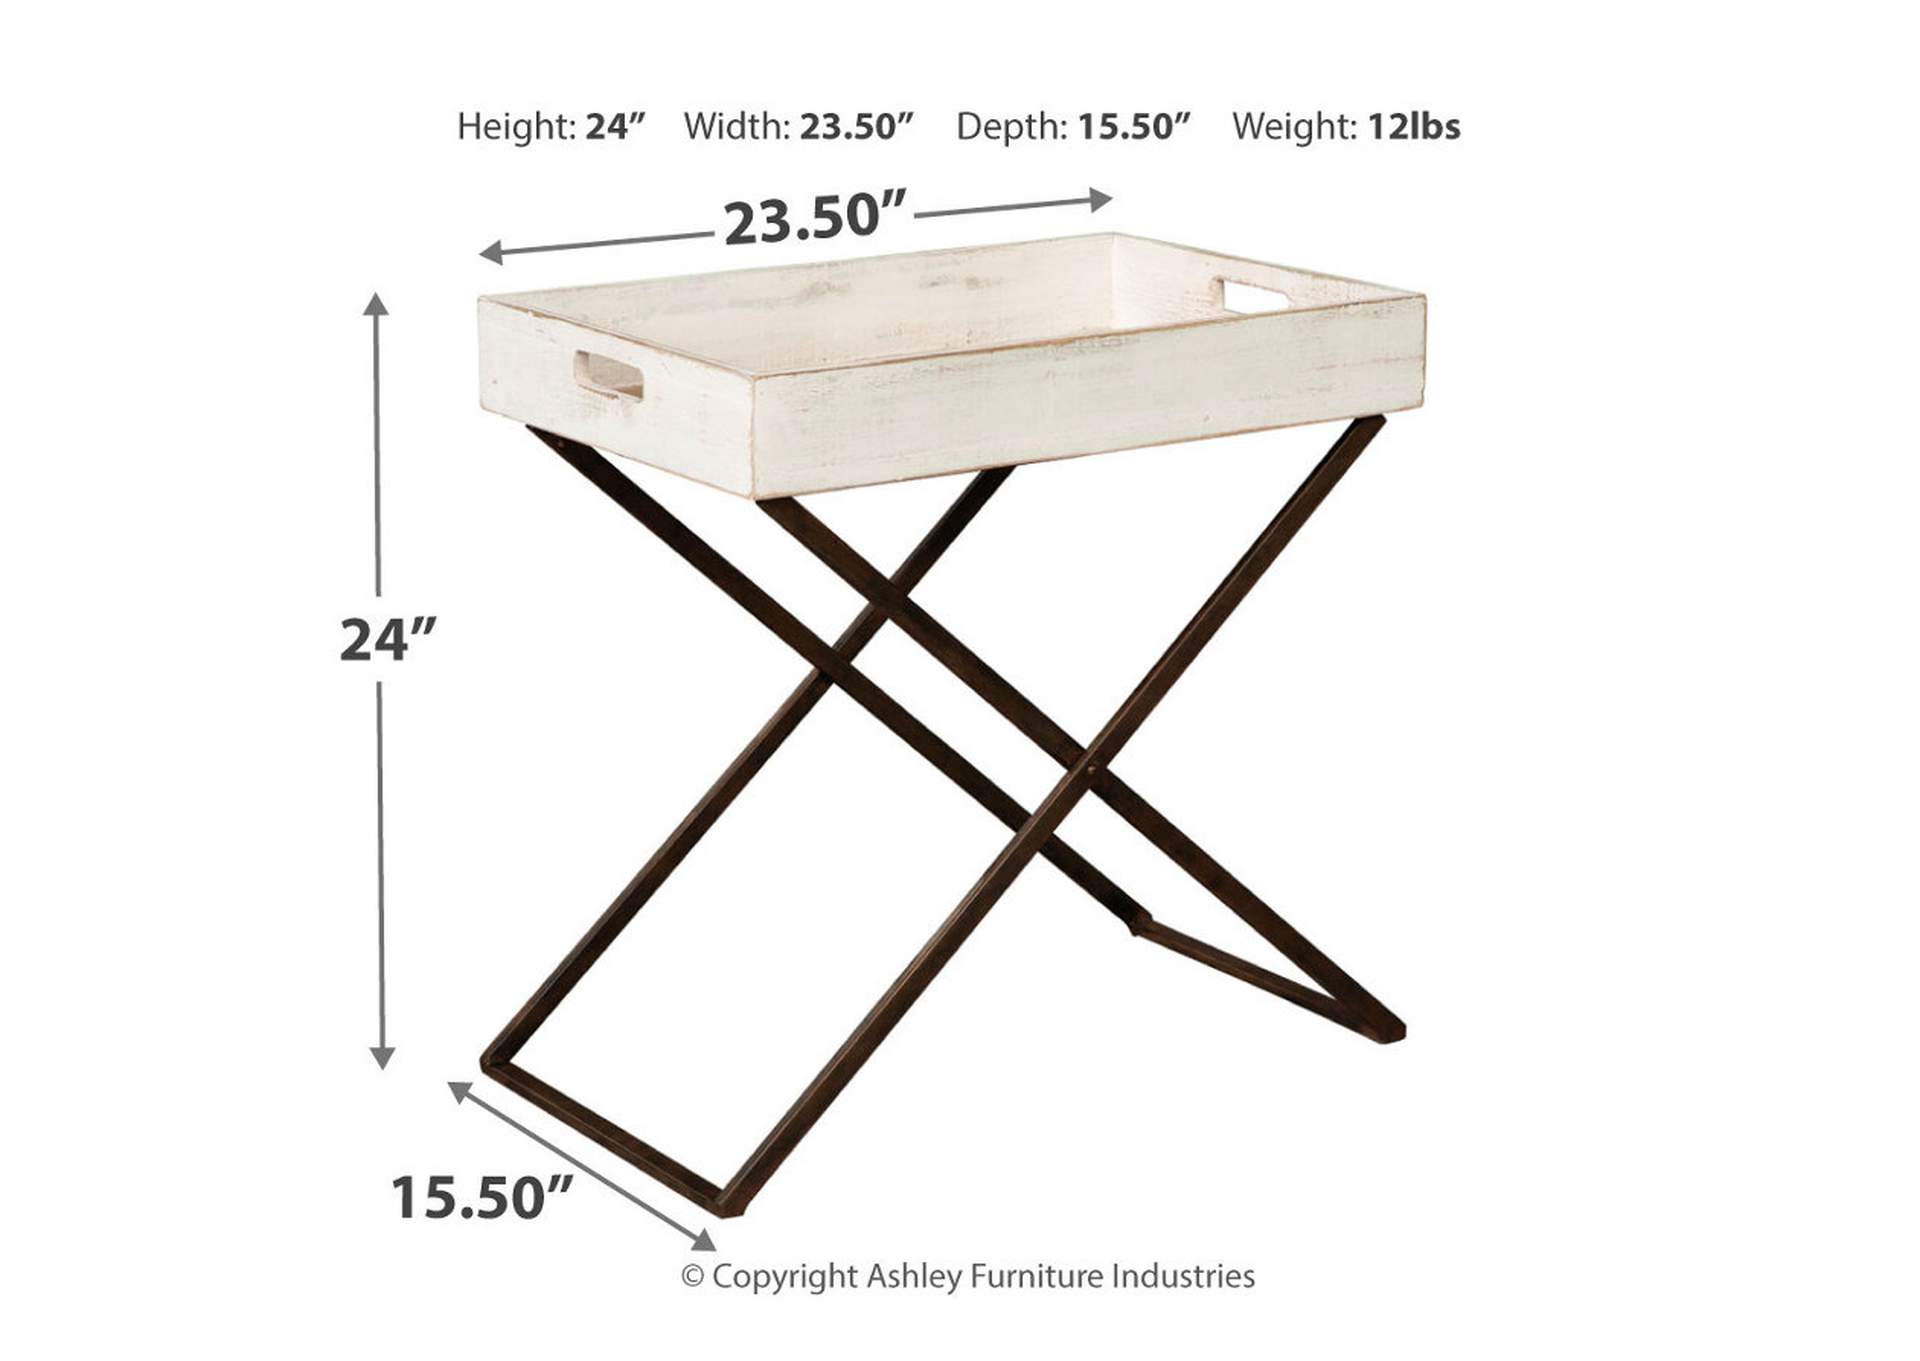 Janfield Accent Table,Signature Design By Ashley